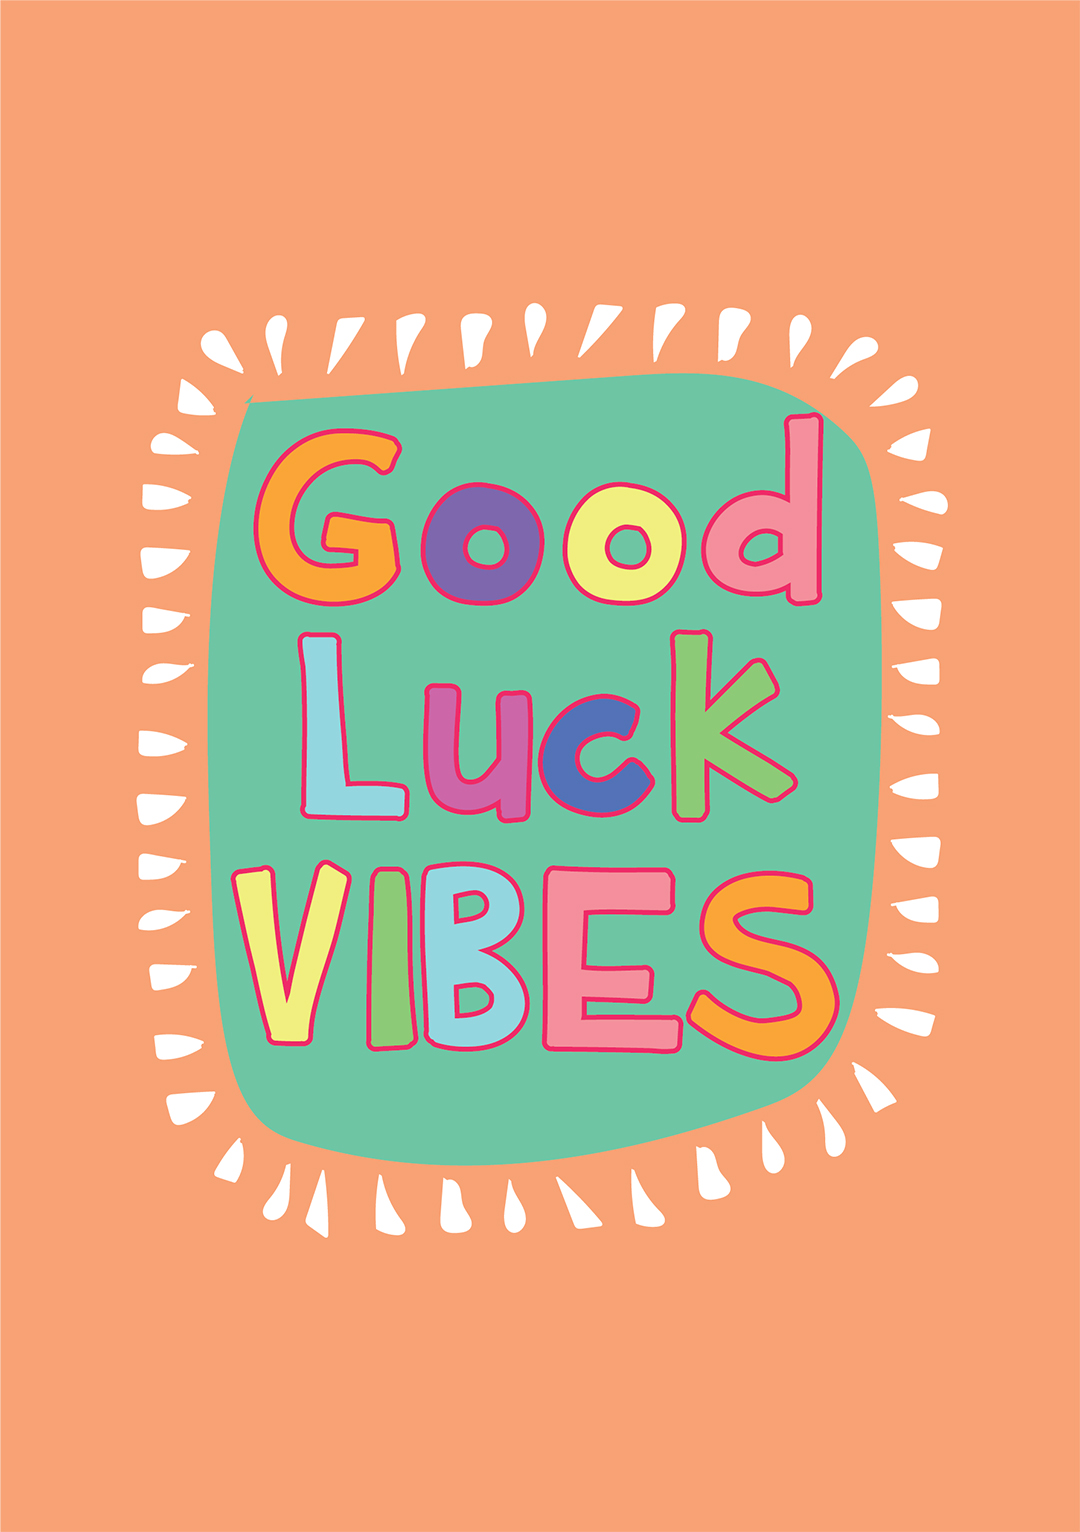 Good Luck Vibes Greeting Card